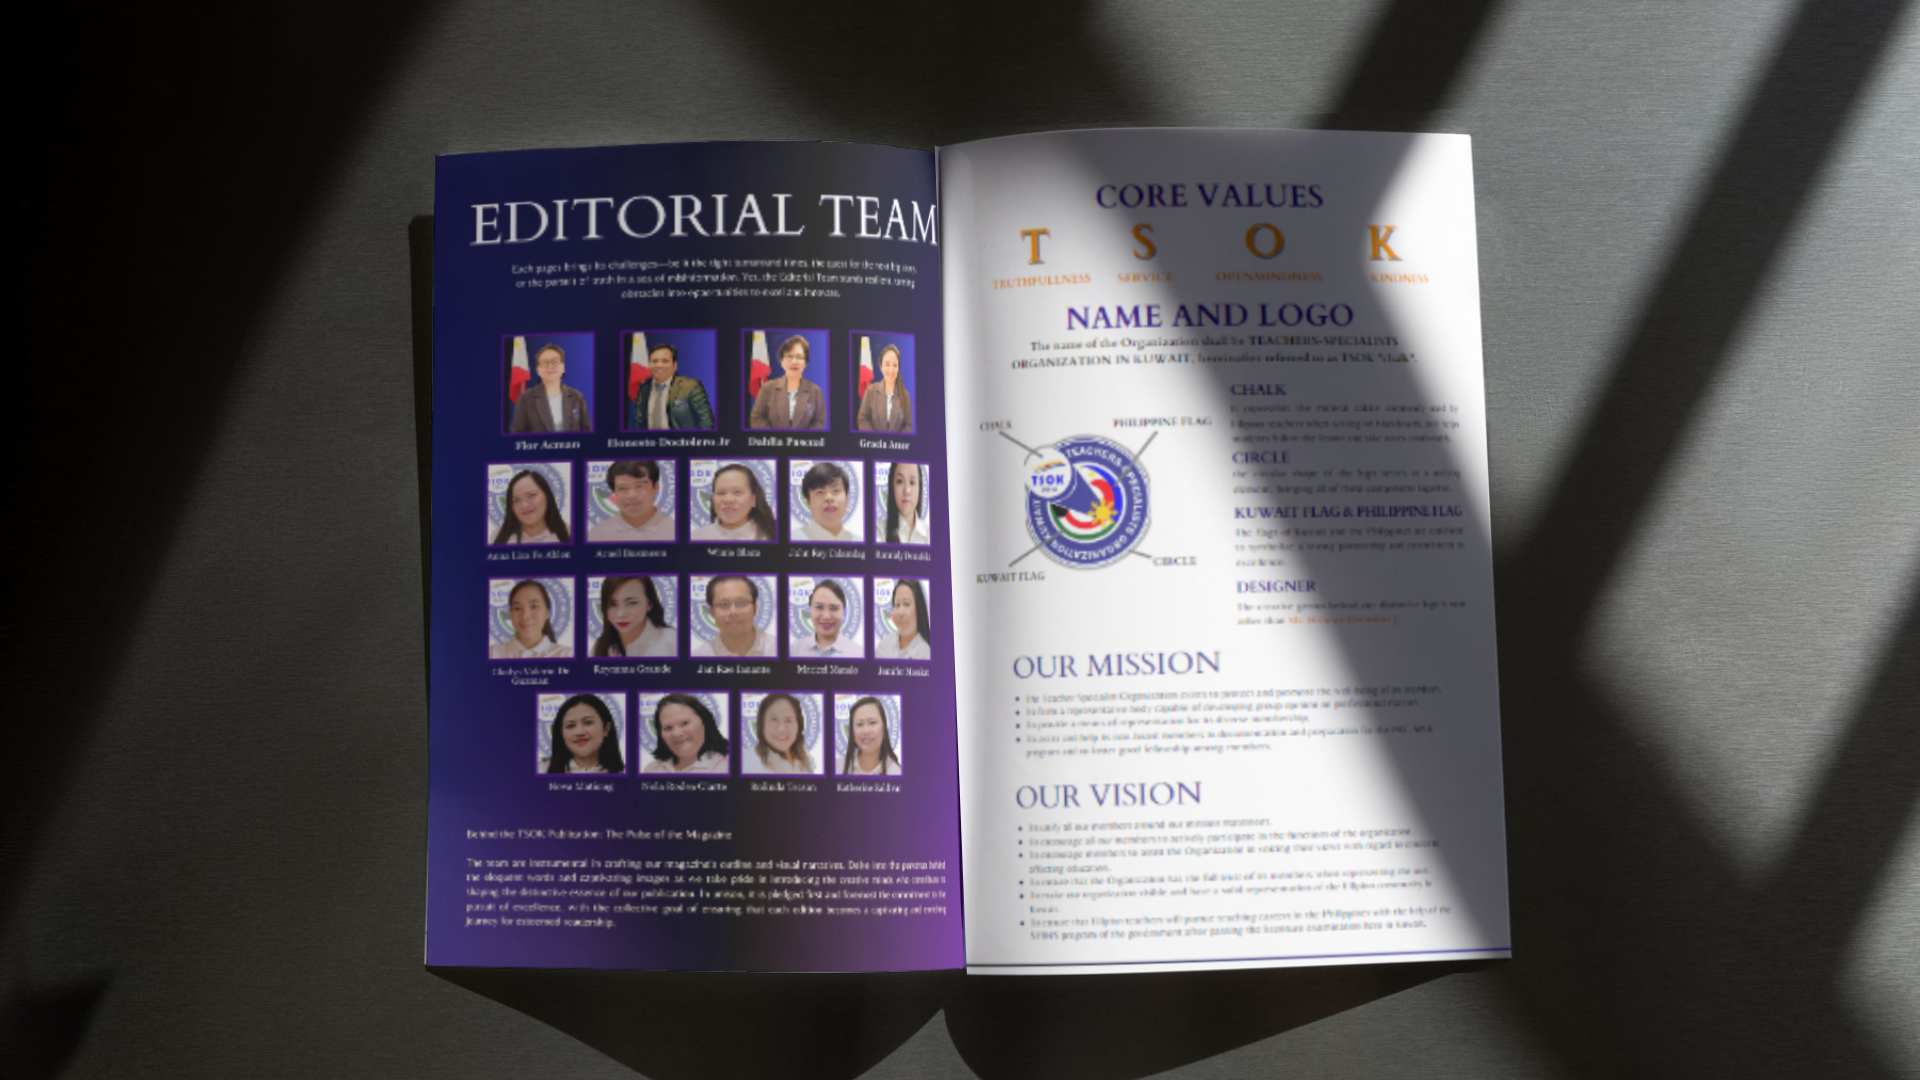 TSOK Magazine Preview of the Editorial Team and the Mision, Vision, and Values of TSOK.